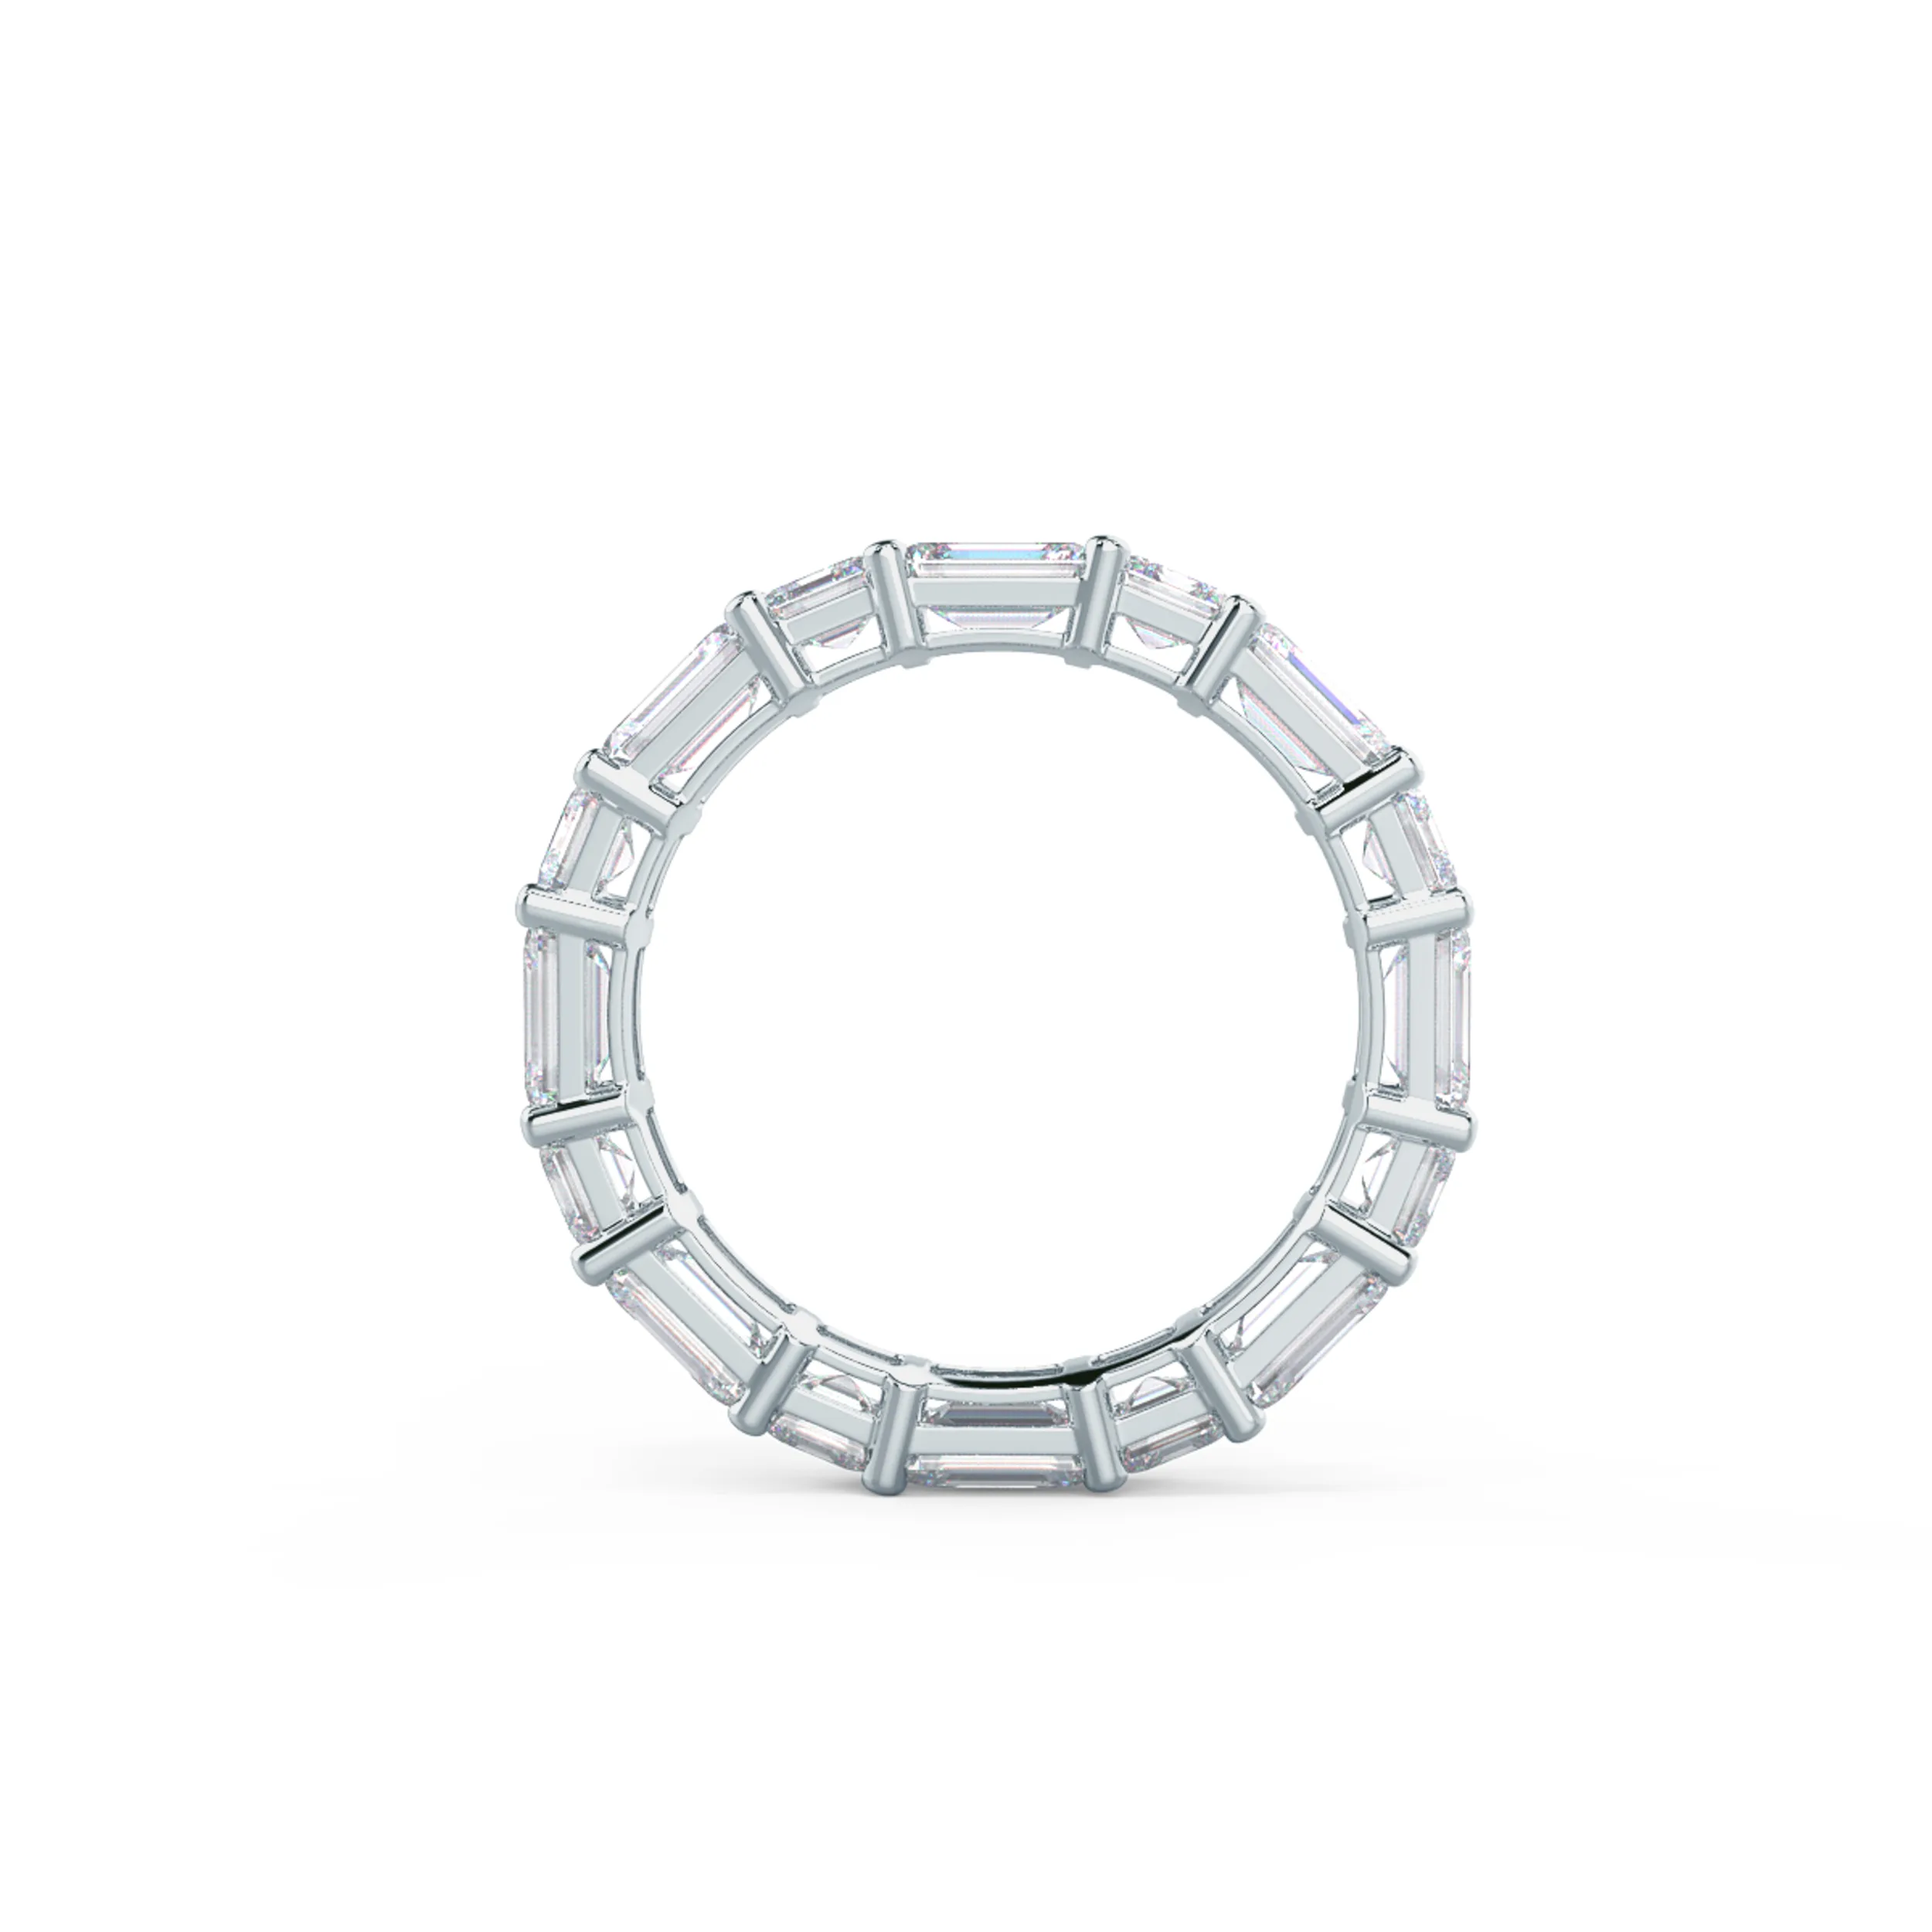 4.8 ct Lab Diamonds Emerald and Asscher East-West Eternity Band in White Gold (Profile View)